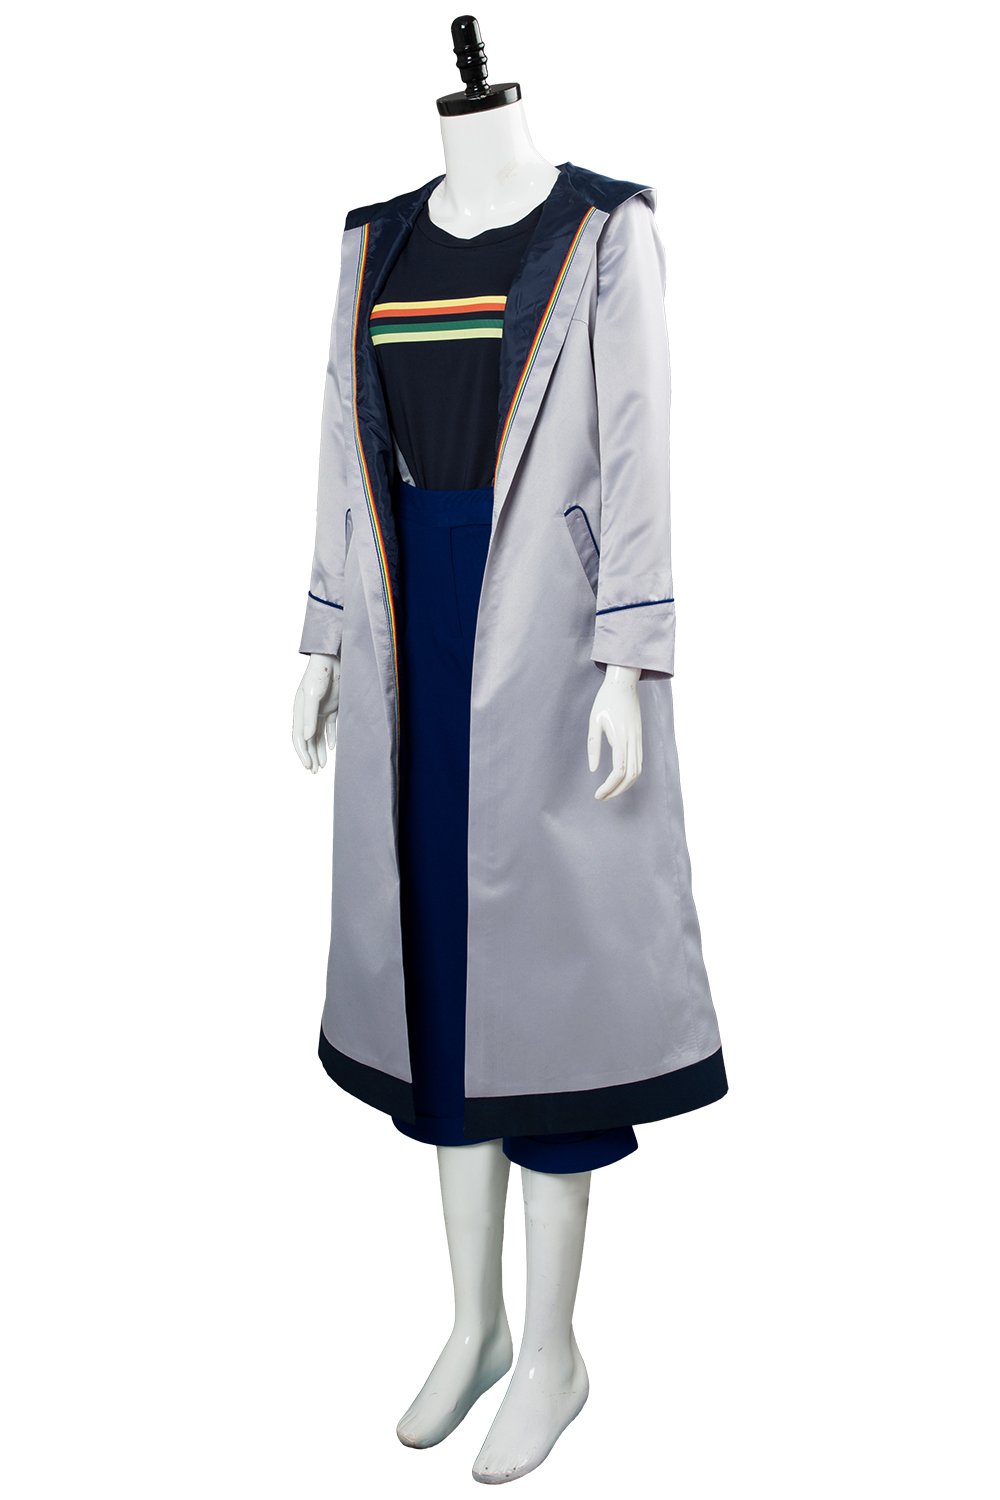 Doctor Who Season 11 Jodie Whittaker Thirteenth Doctor Outfit Cosplay Costume